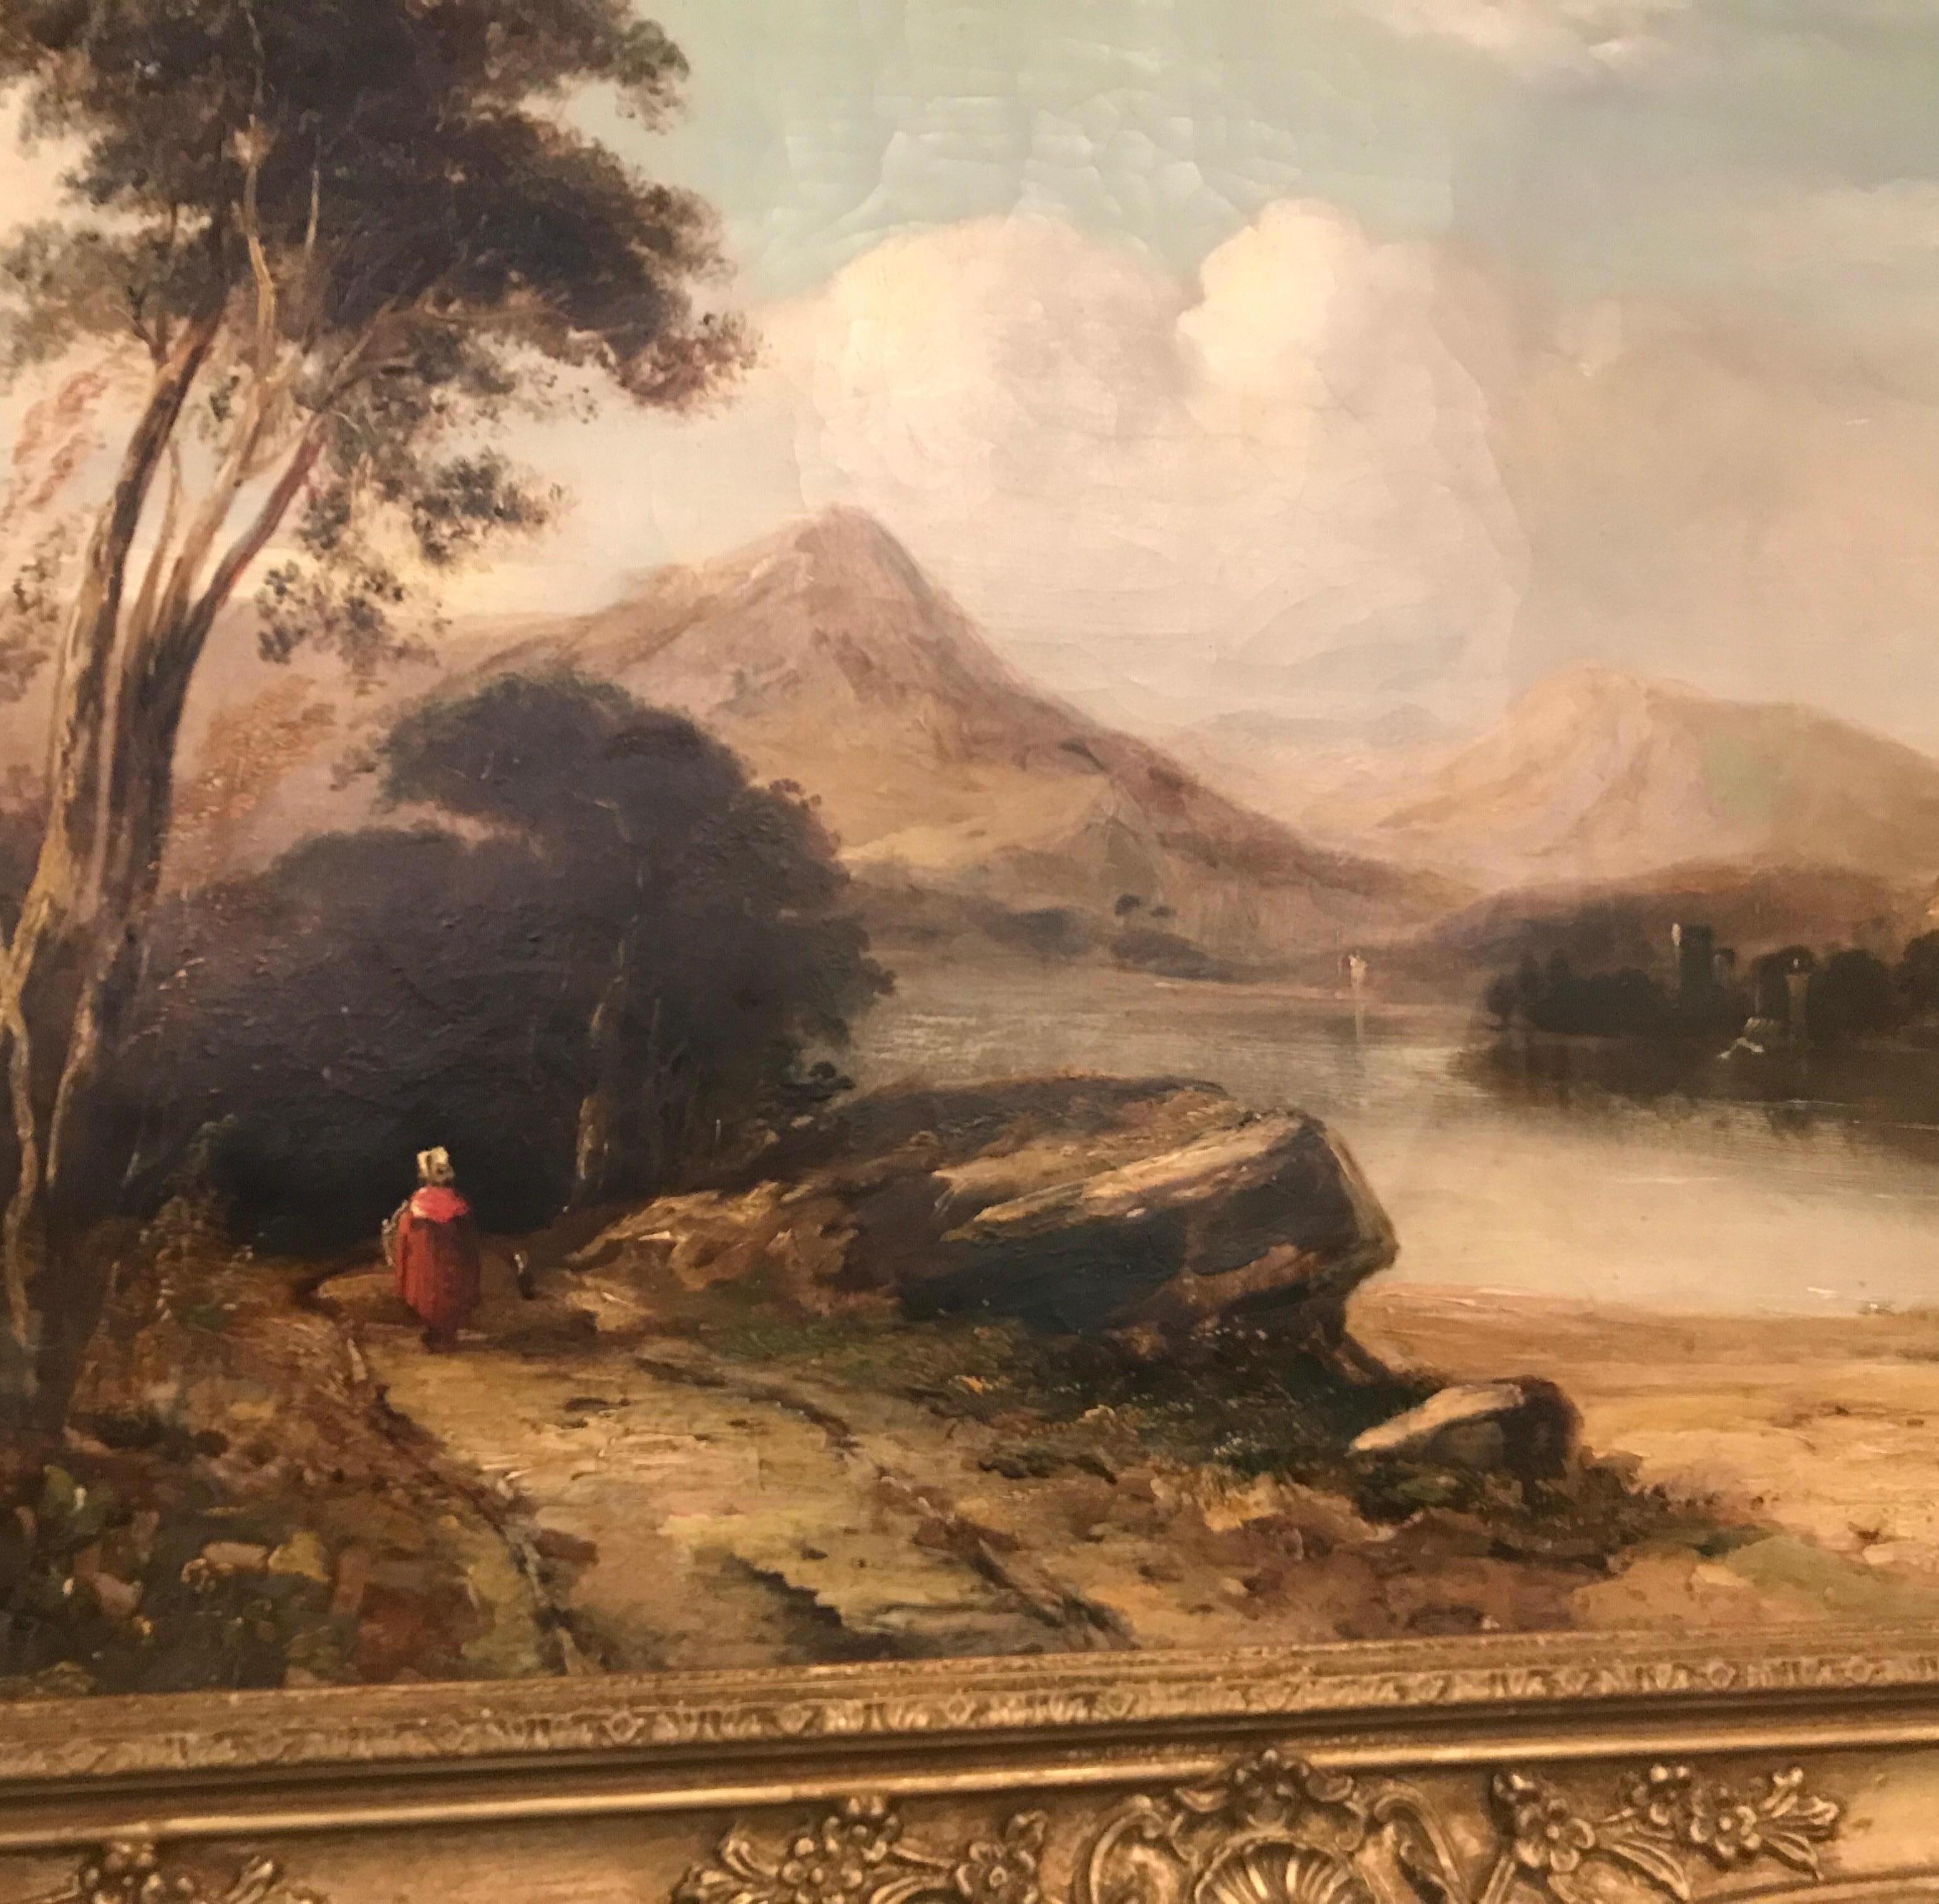 19th century oil on canvas bucolic scene signed on back Alfred Walker Williams (1824-1905) A well listed English Victorian artist from a family of artists. Members of the Barnes School of English painters. In original gilt wood frame with some wear